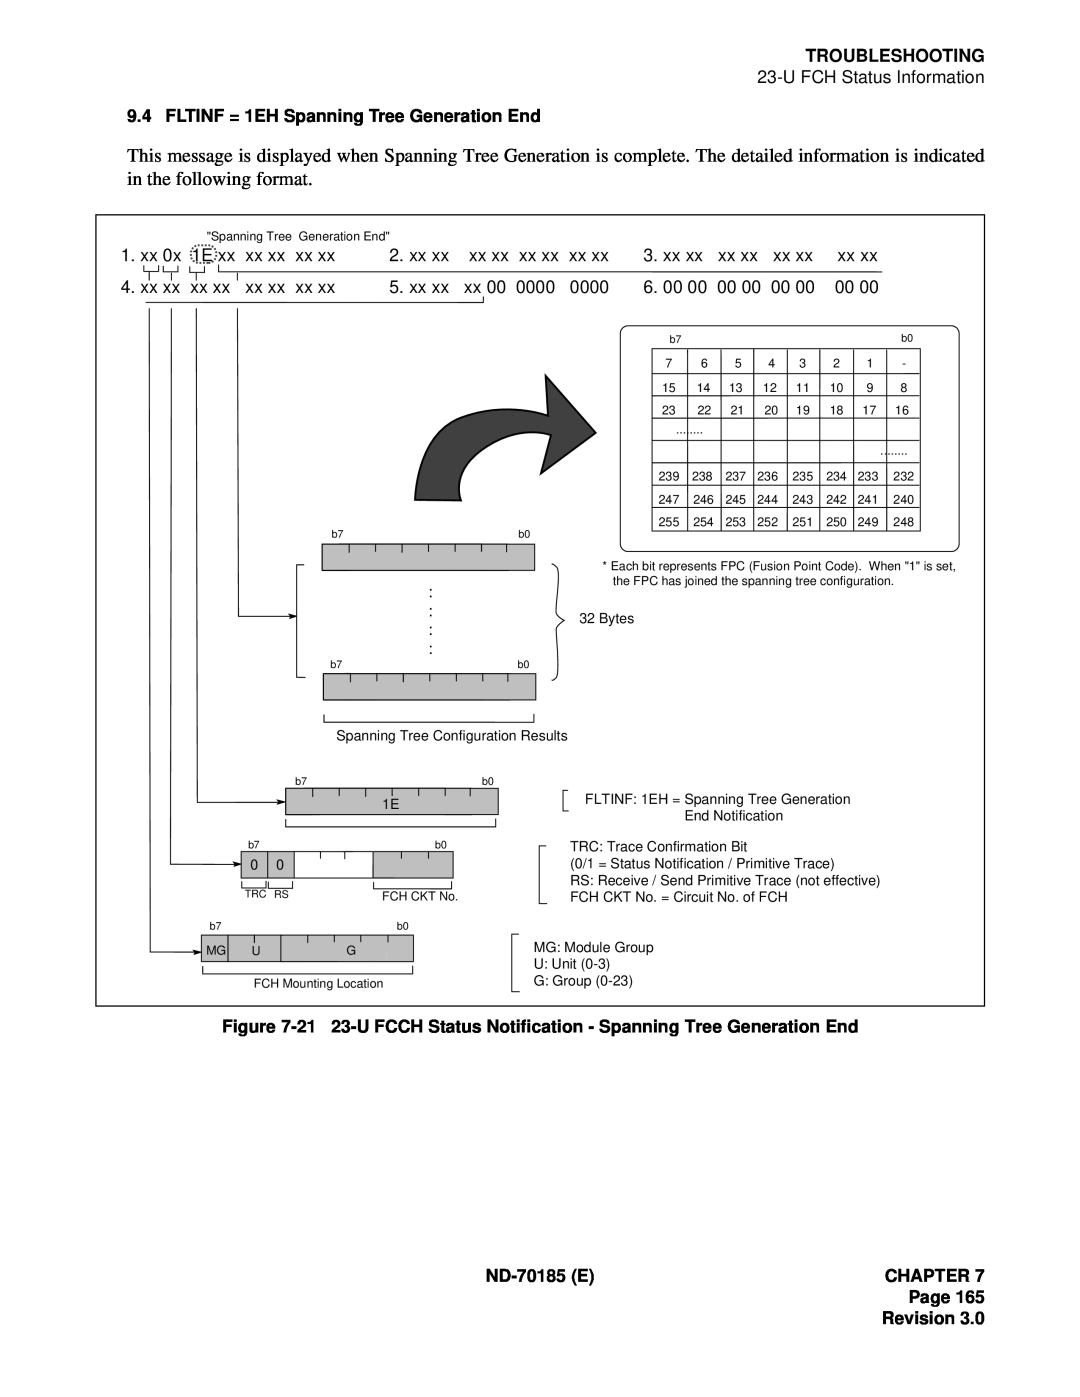 NEC NEAX2400 system manual Troubleshooting, FLTINF = 1EH Spanning Tree Generation End, ND-70185ECHAPTER Page Revision 